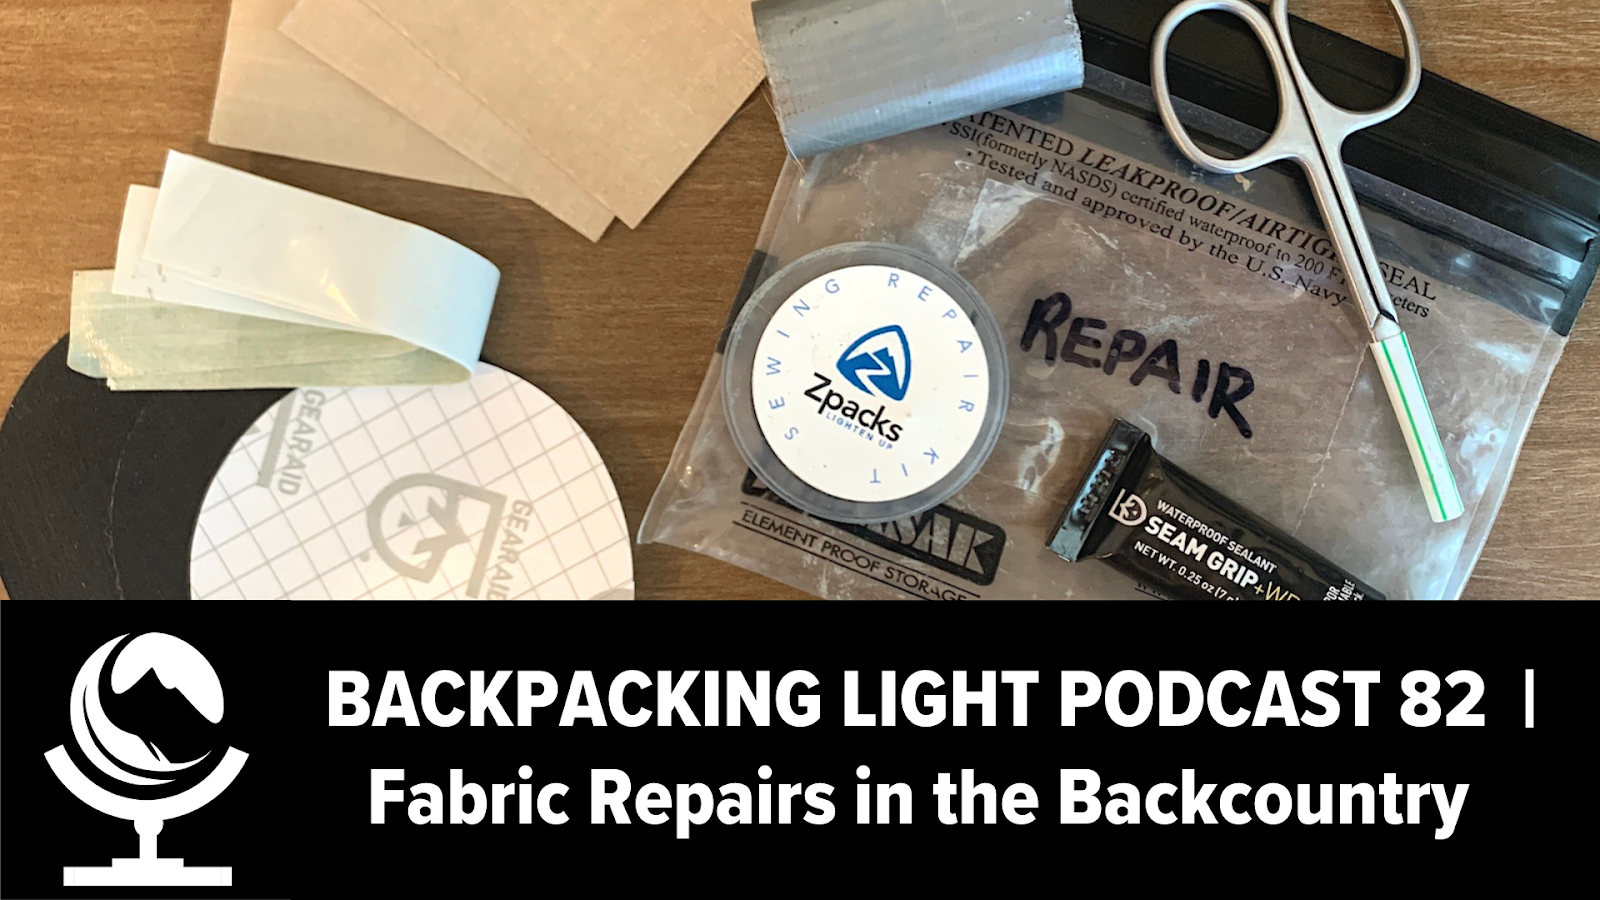 Episode 82  Fabric Repairs in the Backcountry - Backpacking Light